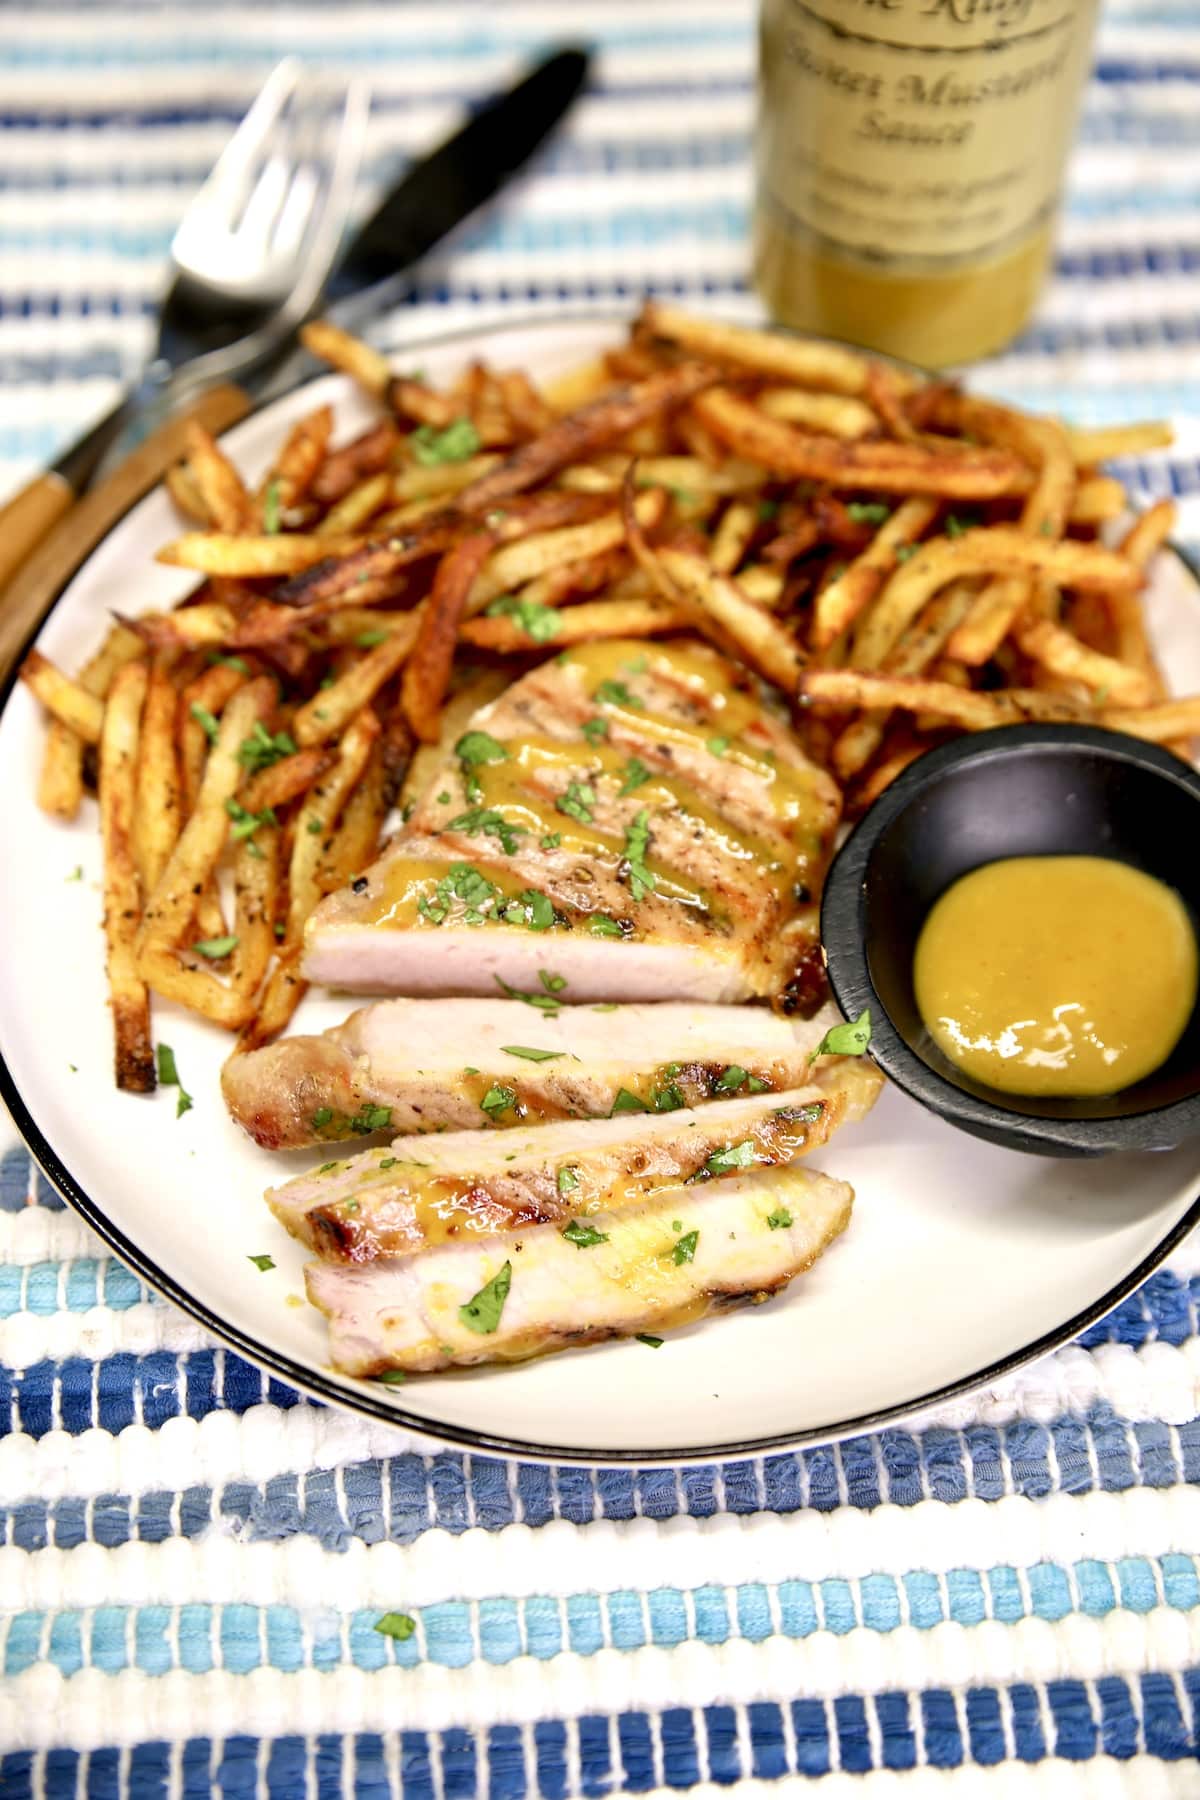 Mustard glazed pork chop on a plate with fries and mustard sauce.